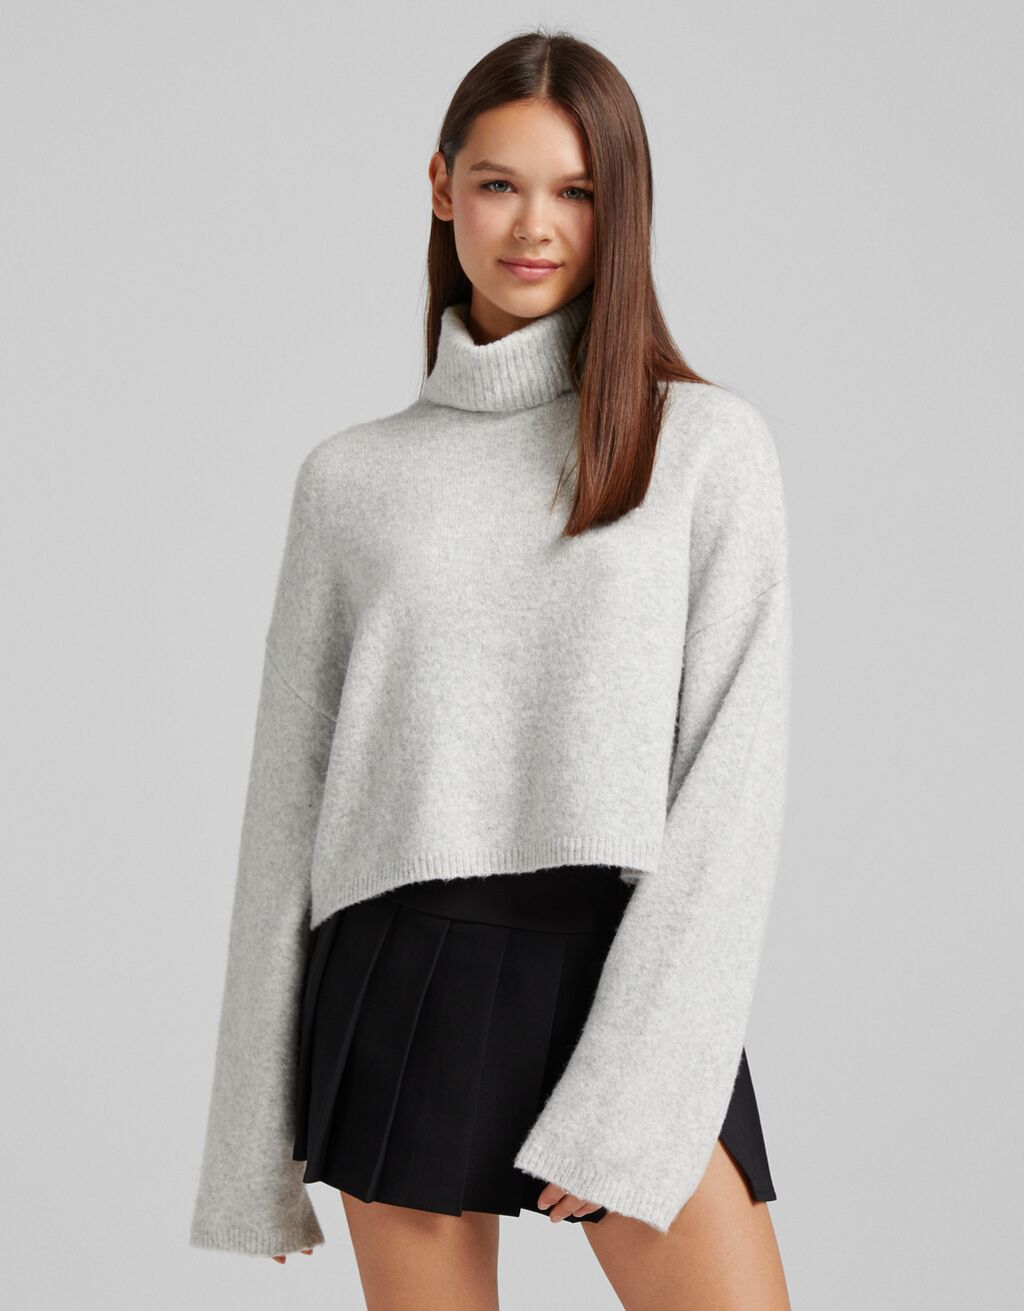 Cropped turtleneck sweater